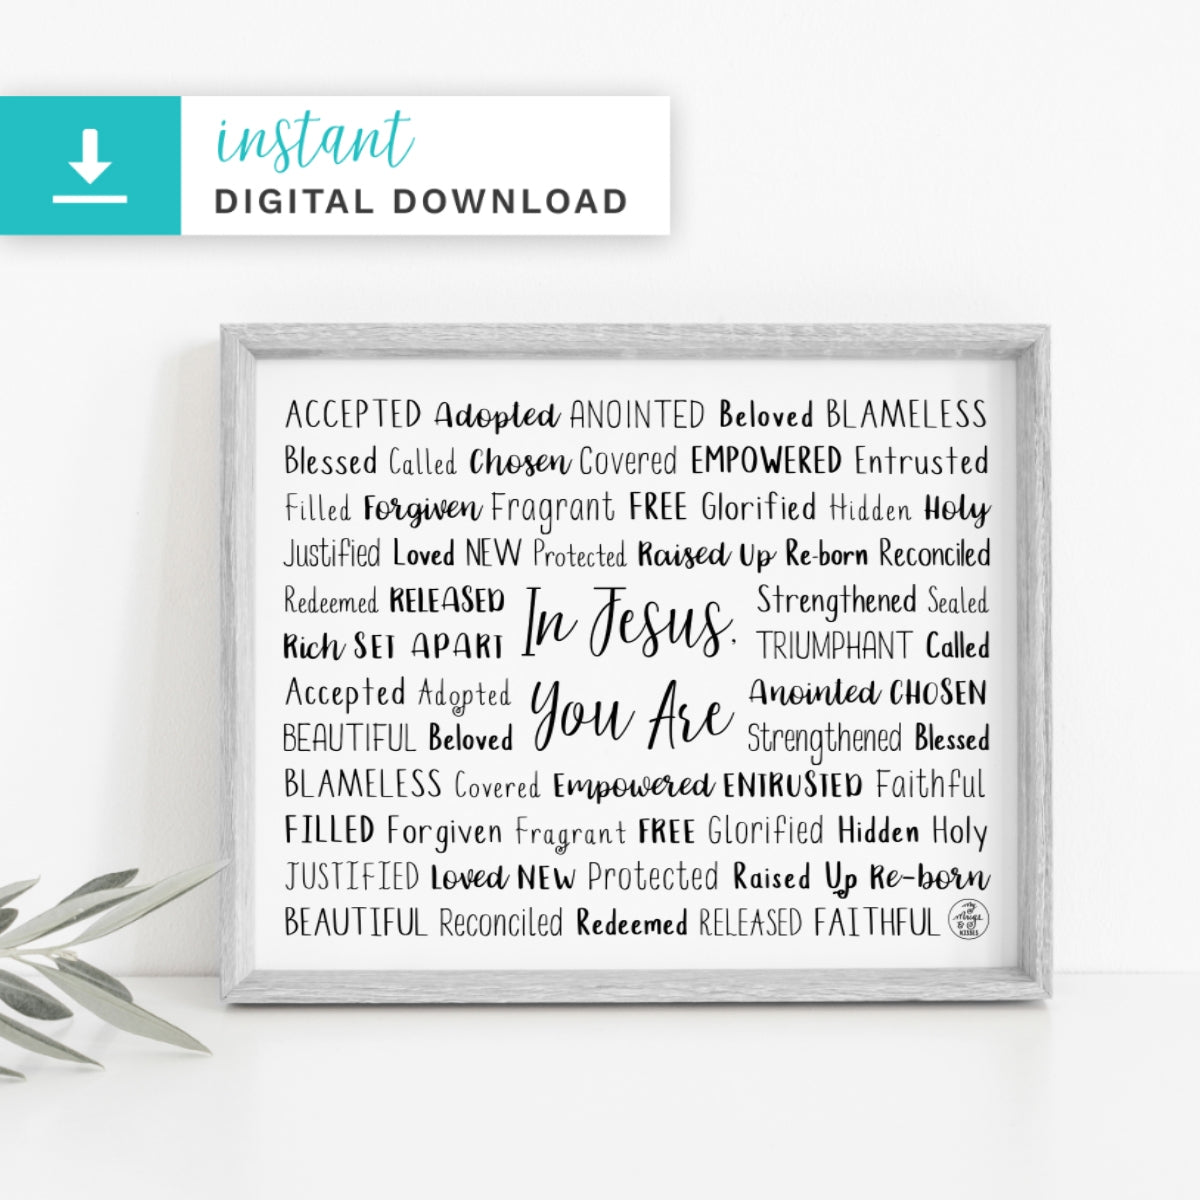 In Jesus, You Are Digital Download